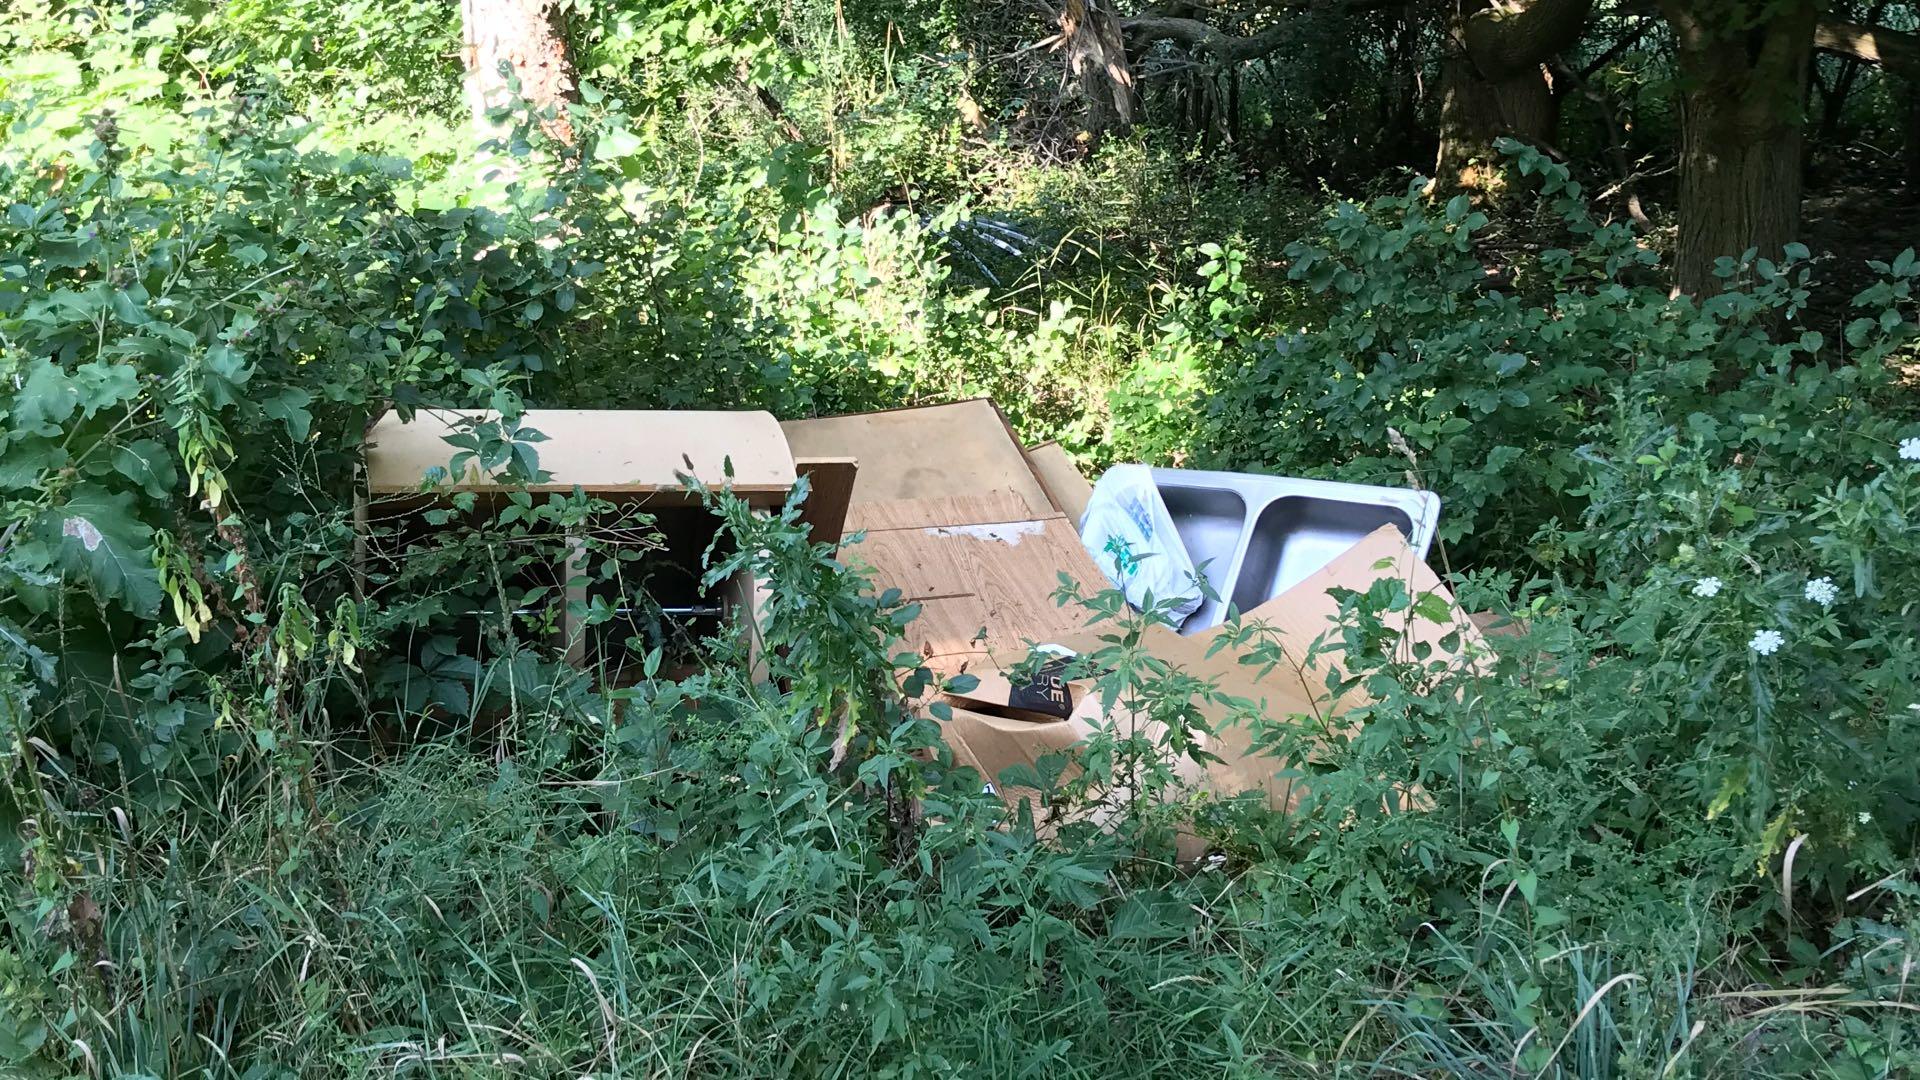 People dump everything, including the kitchen sink, in Cook County's forest preserves. (Courtesy of the Forest Preserve District of Cook County)